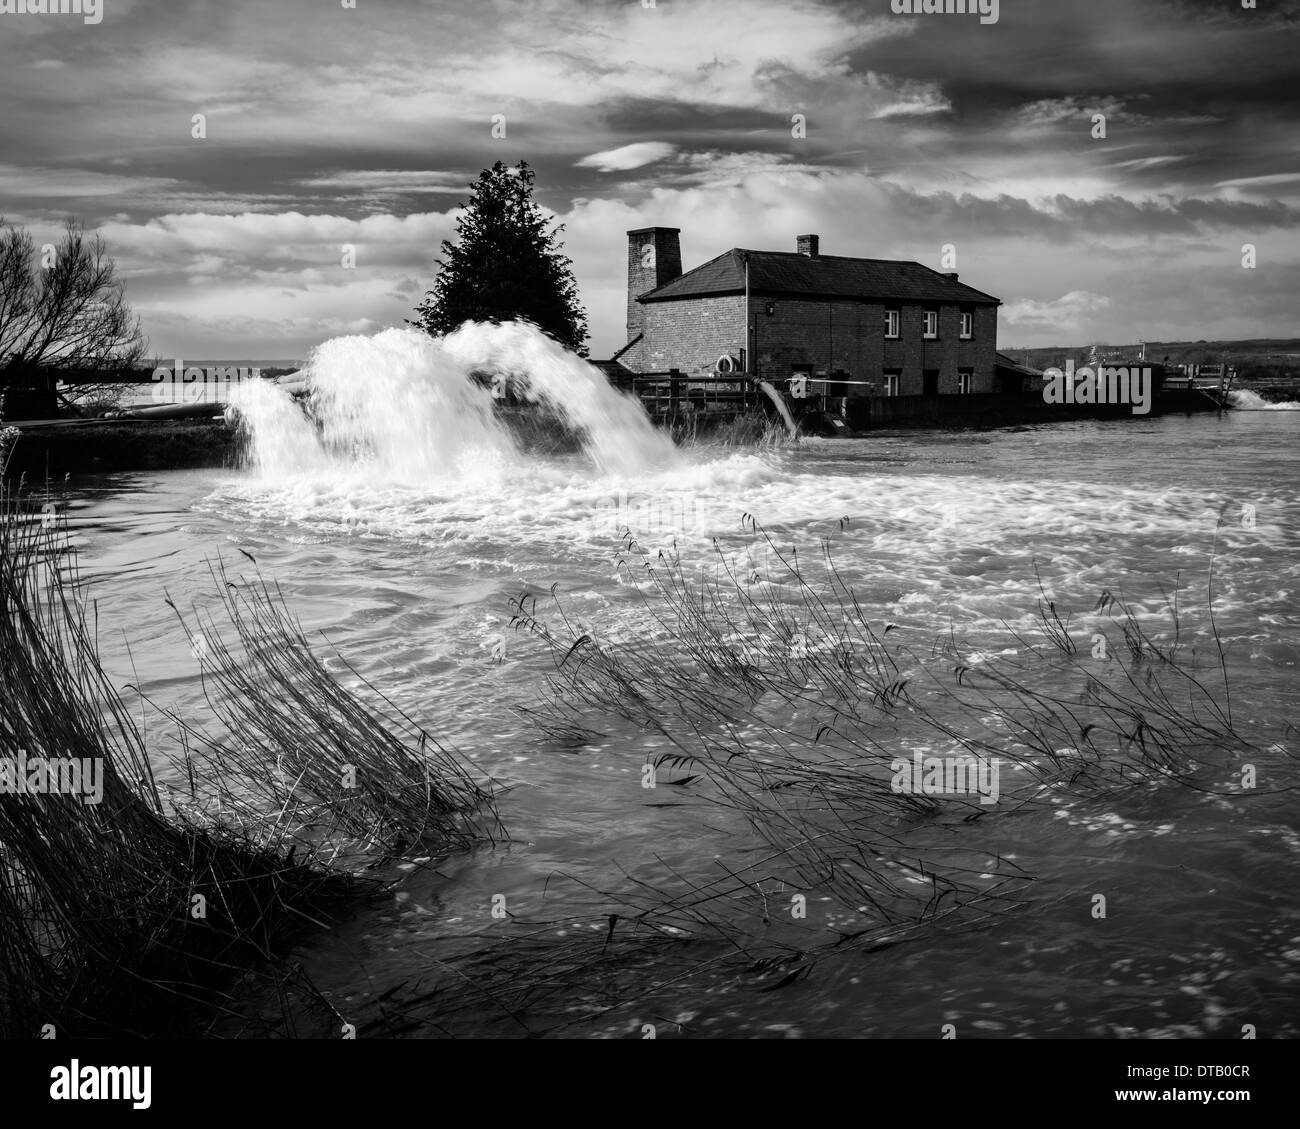 Burrowbridge pumping station, discharging floodwater into the already swollen river Parrett, during the 2014 floods Stock Photo